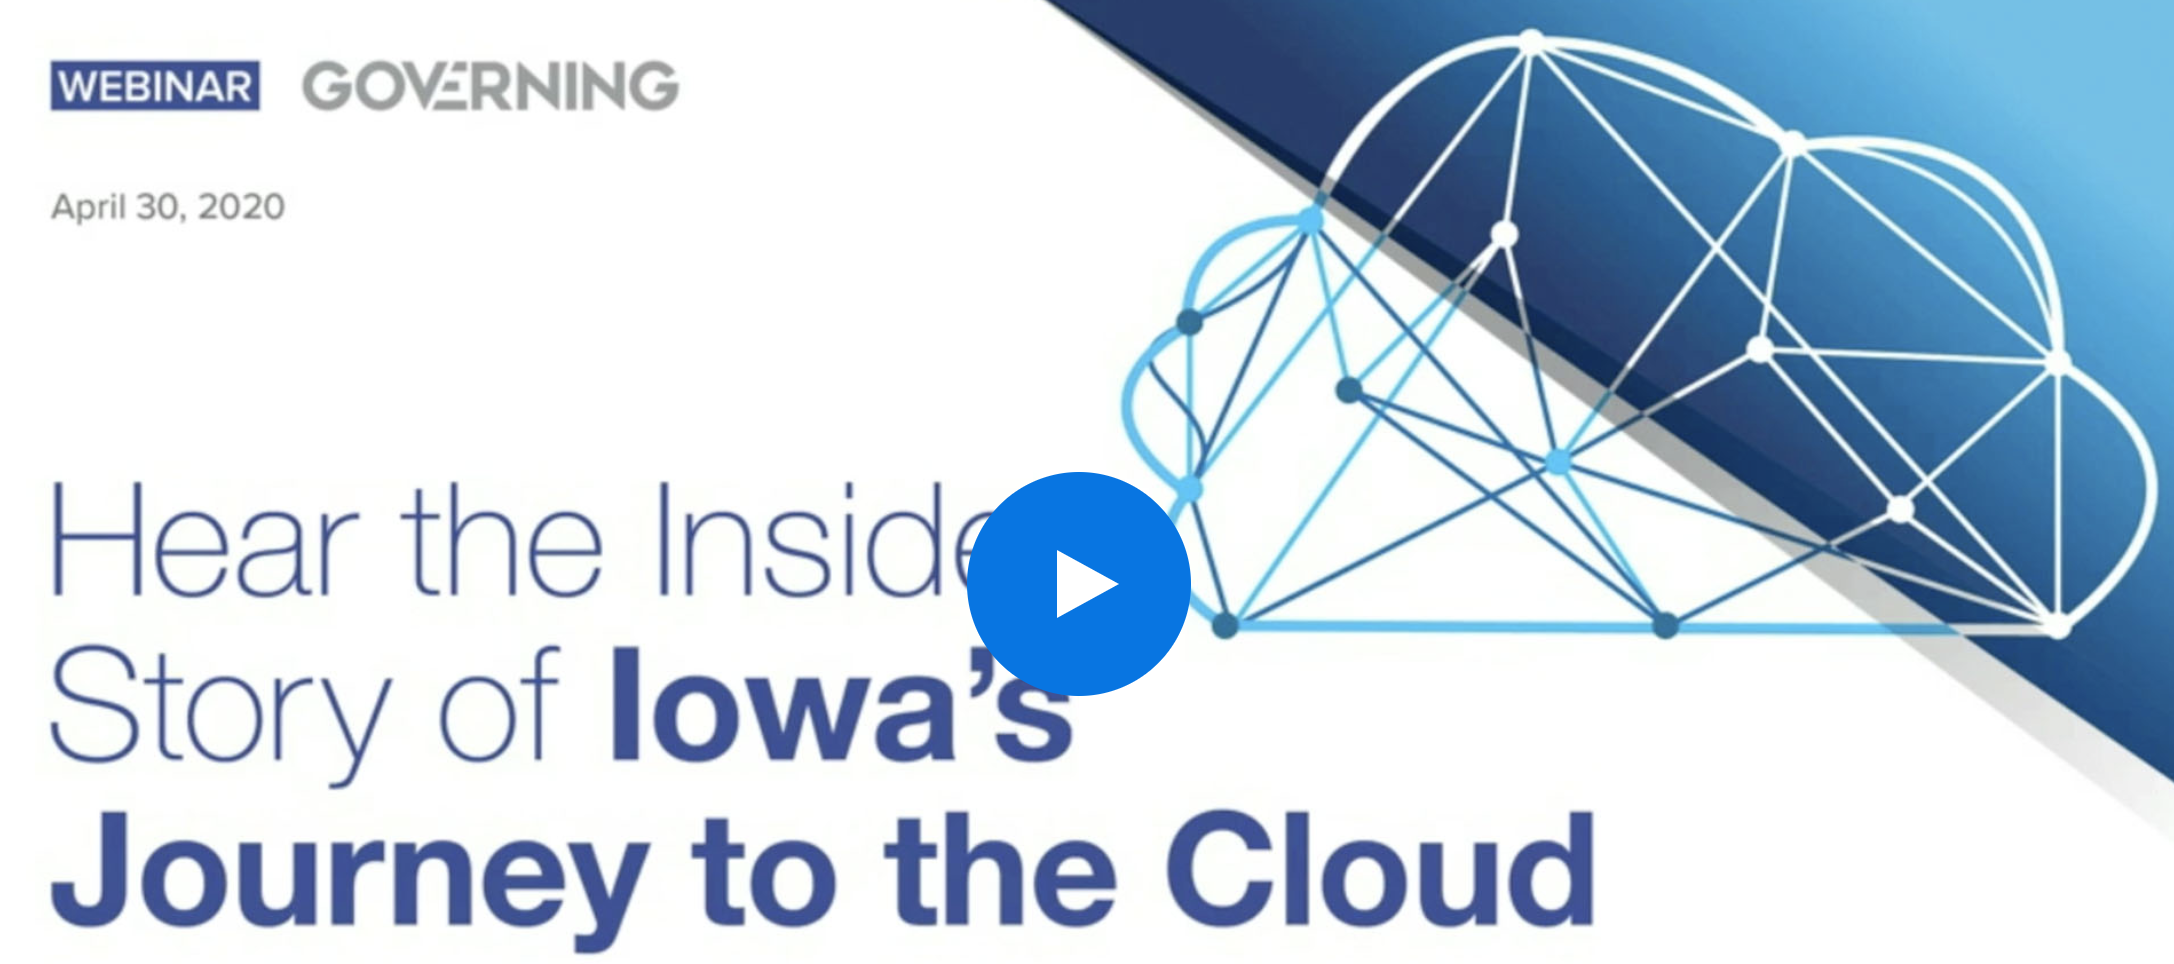 The State of Iowa’s Journey to the Cloud